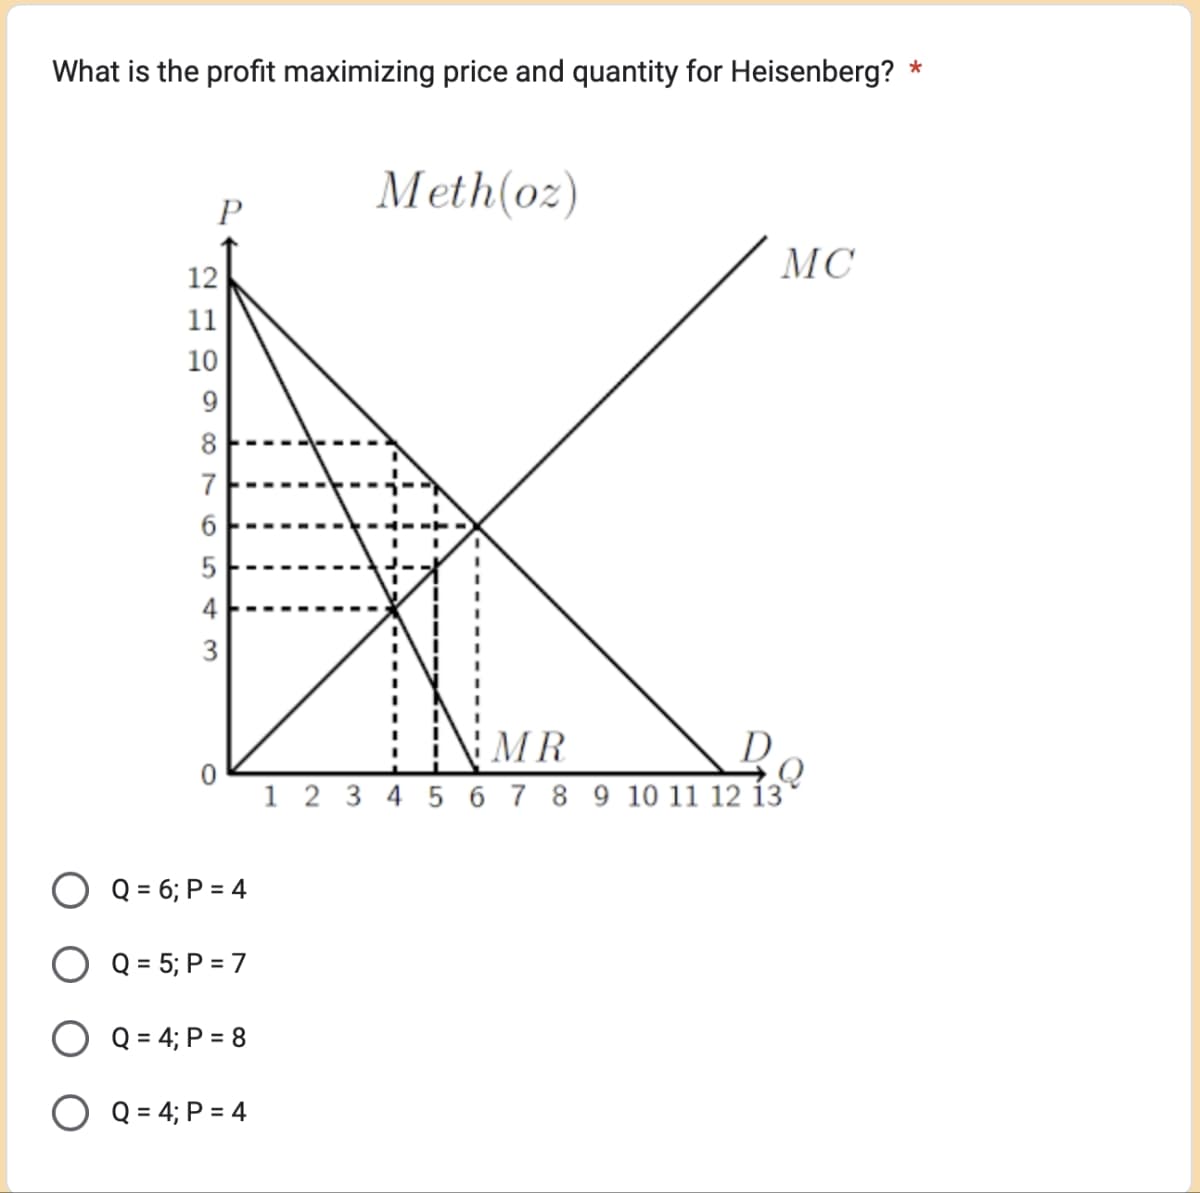 What is the profit maximizing price and quantity for Heisenberg? *
Meth(oz)
P
12
11
10
9876543
3
0
Q = 6; P = 4
Q = 5; P = 7
Q = 4; P = 8
MC
MR
1 2 3 4 5 6 7 8 9 10 11 12 13
Q = 4; P = 4